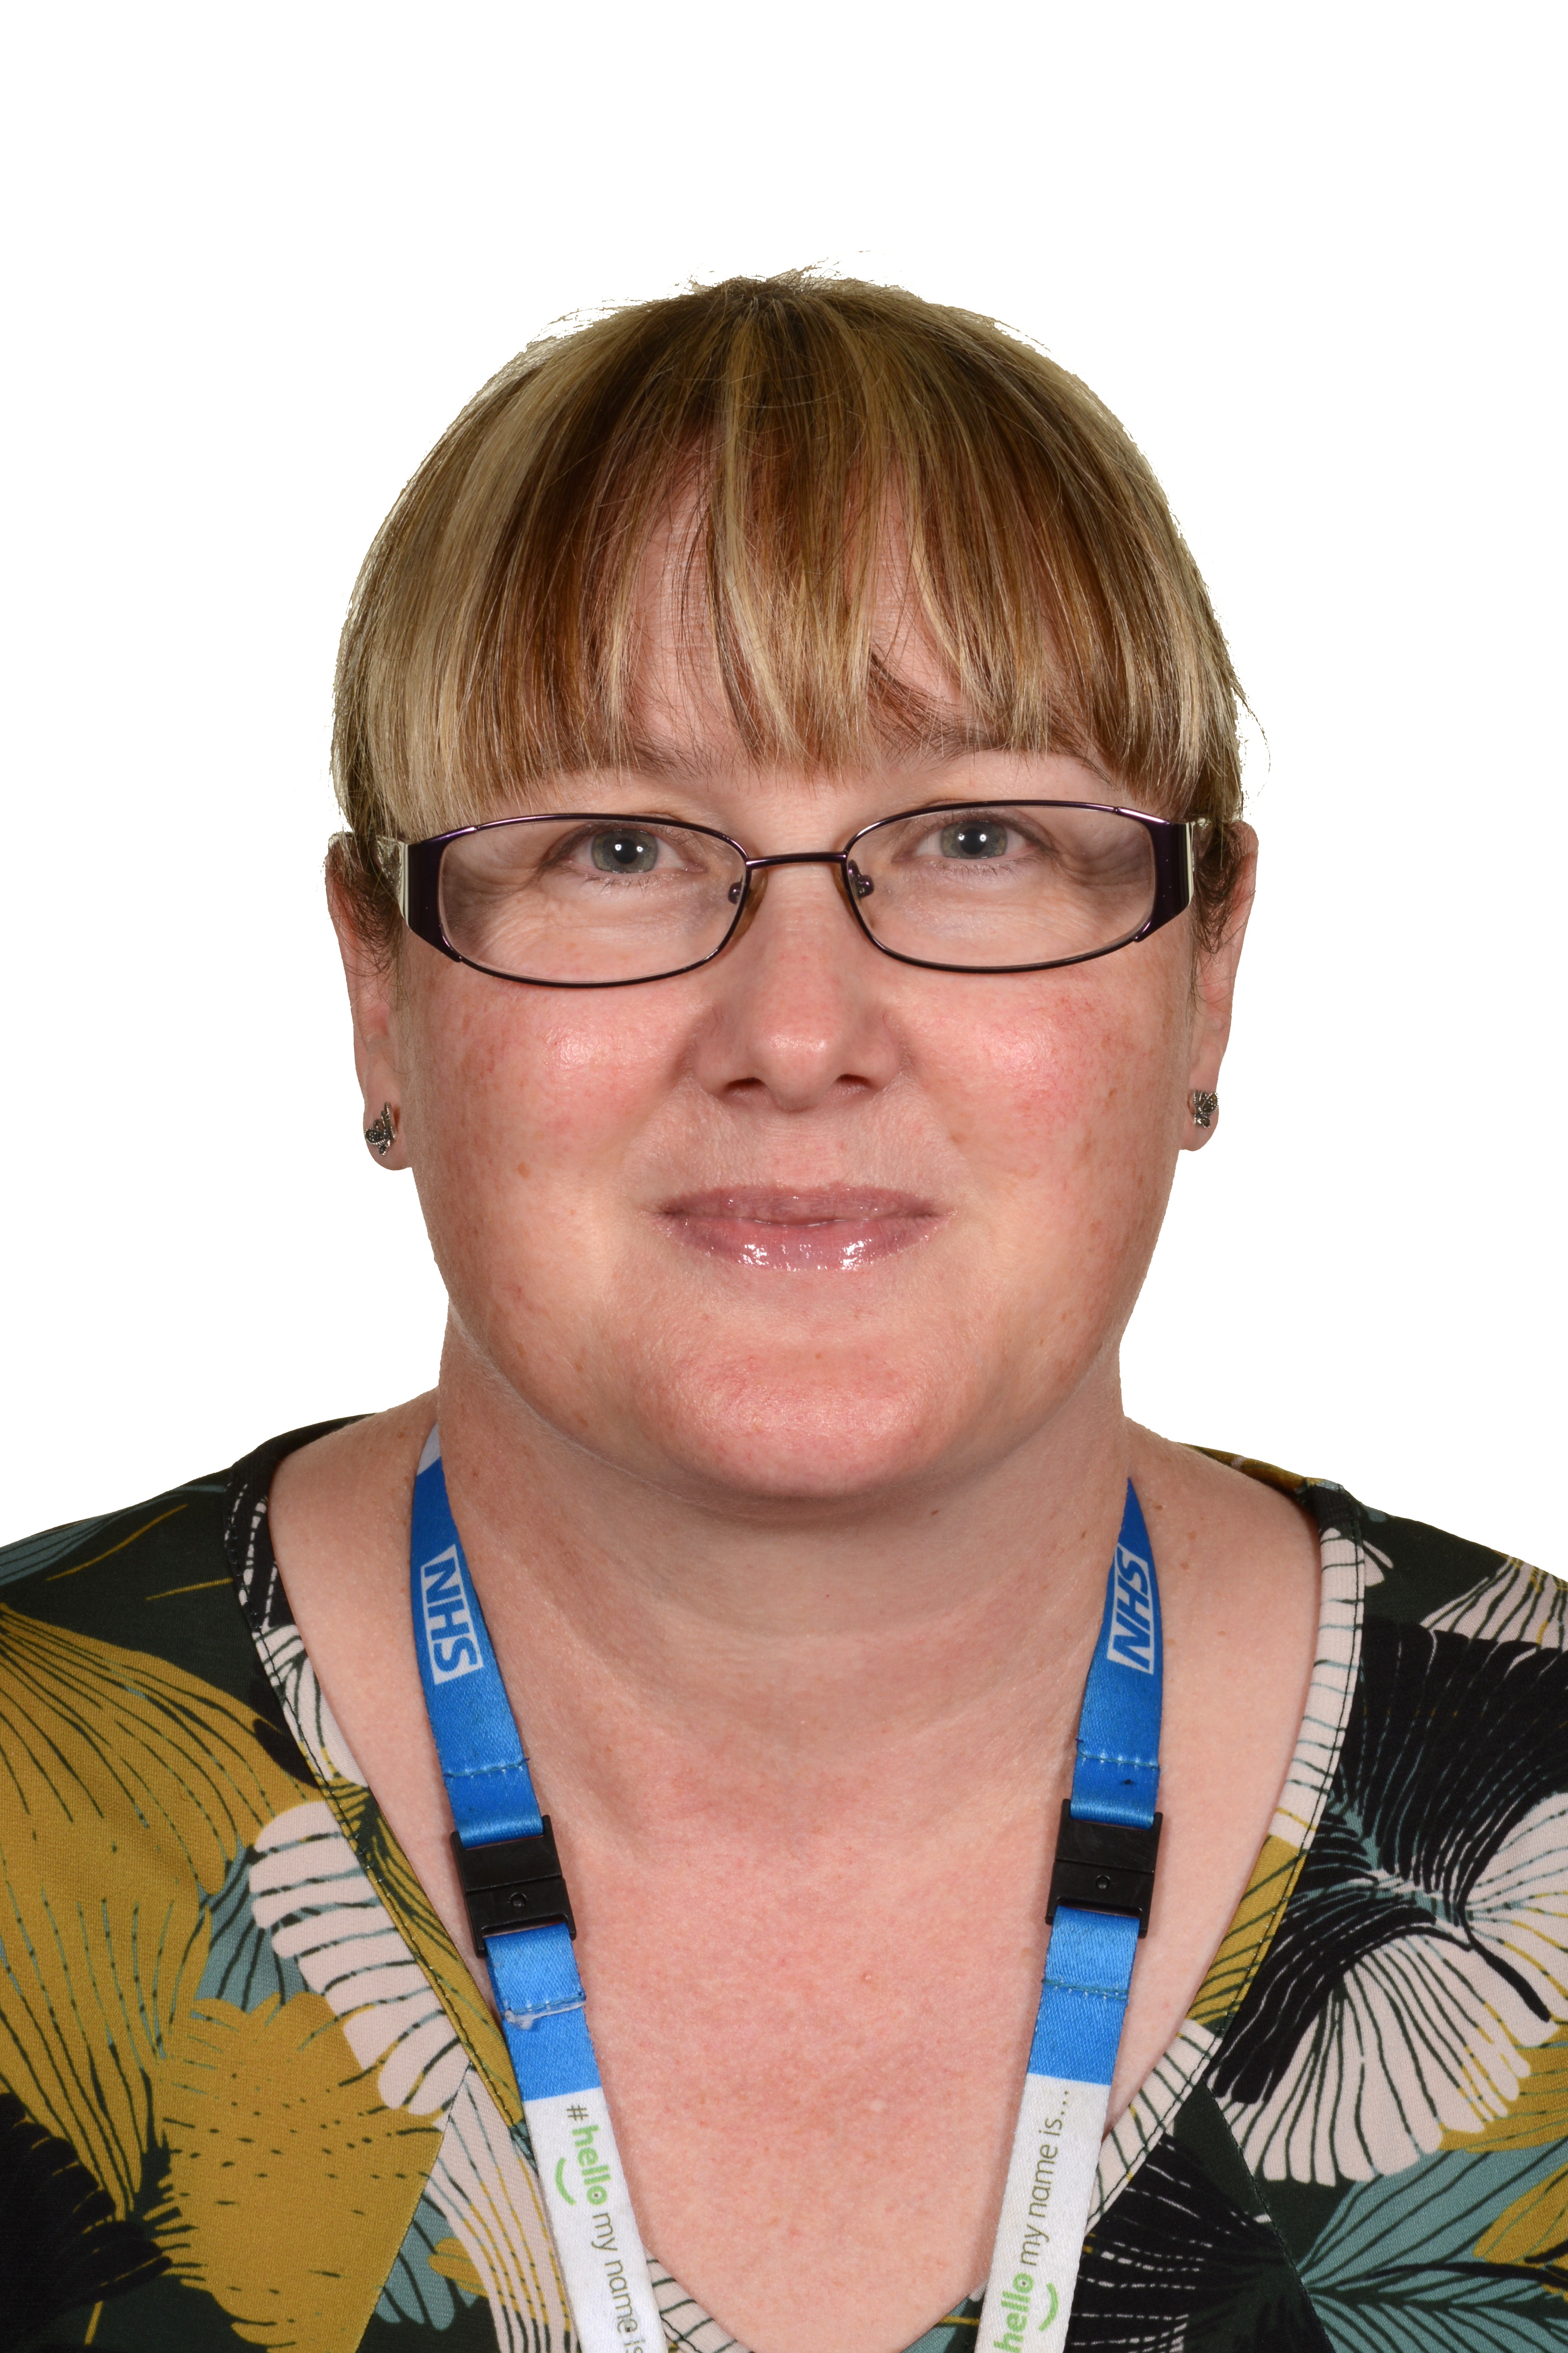 Photograph of Amanda McKie, Matron Lead for Learning Disabilities at Calderdale and Huddersfield NHS Foundation Trust